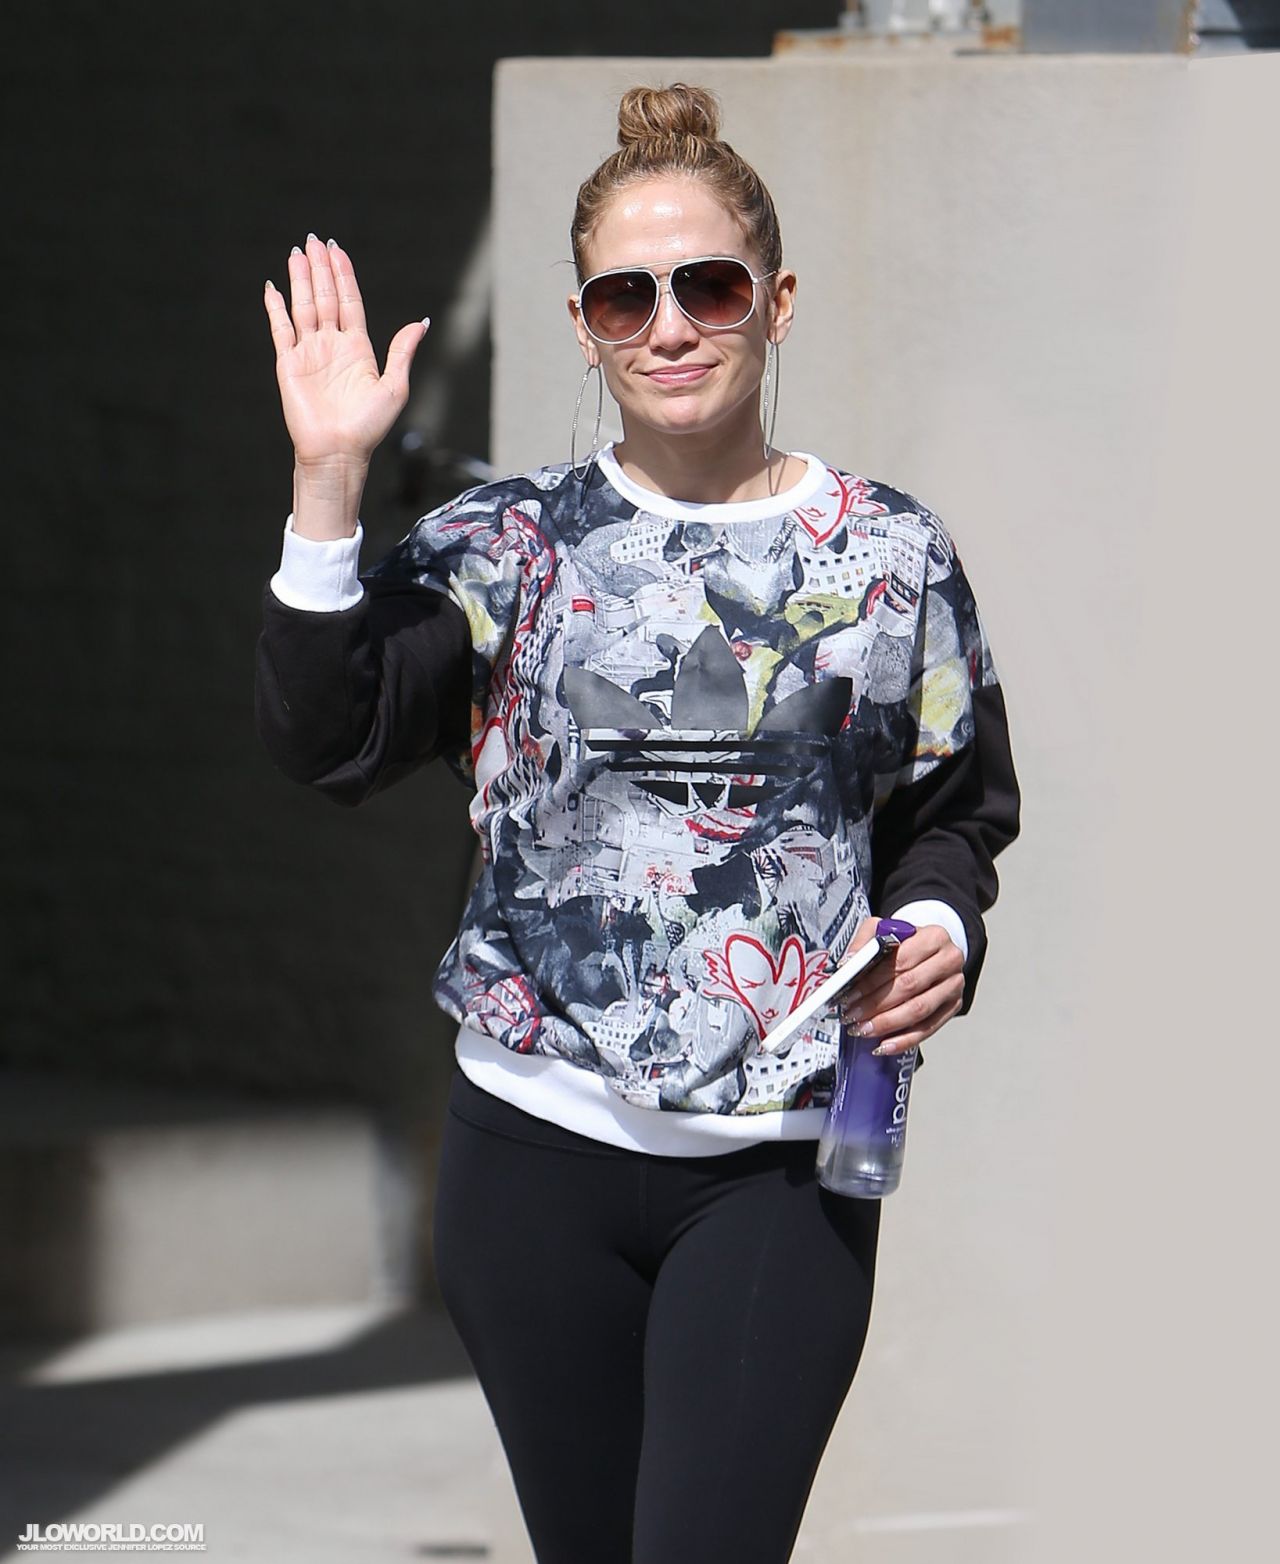 Jennifer Lopez in Black Tights Out in New York City - June 2014